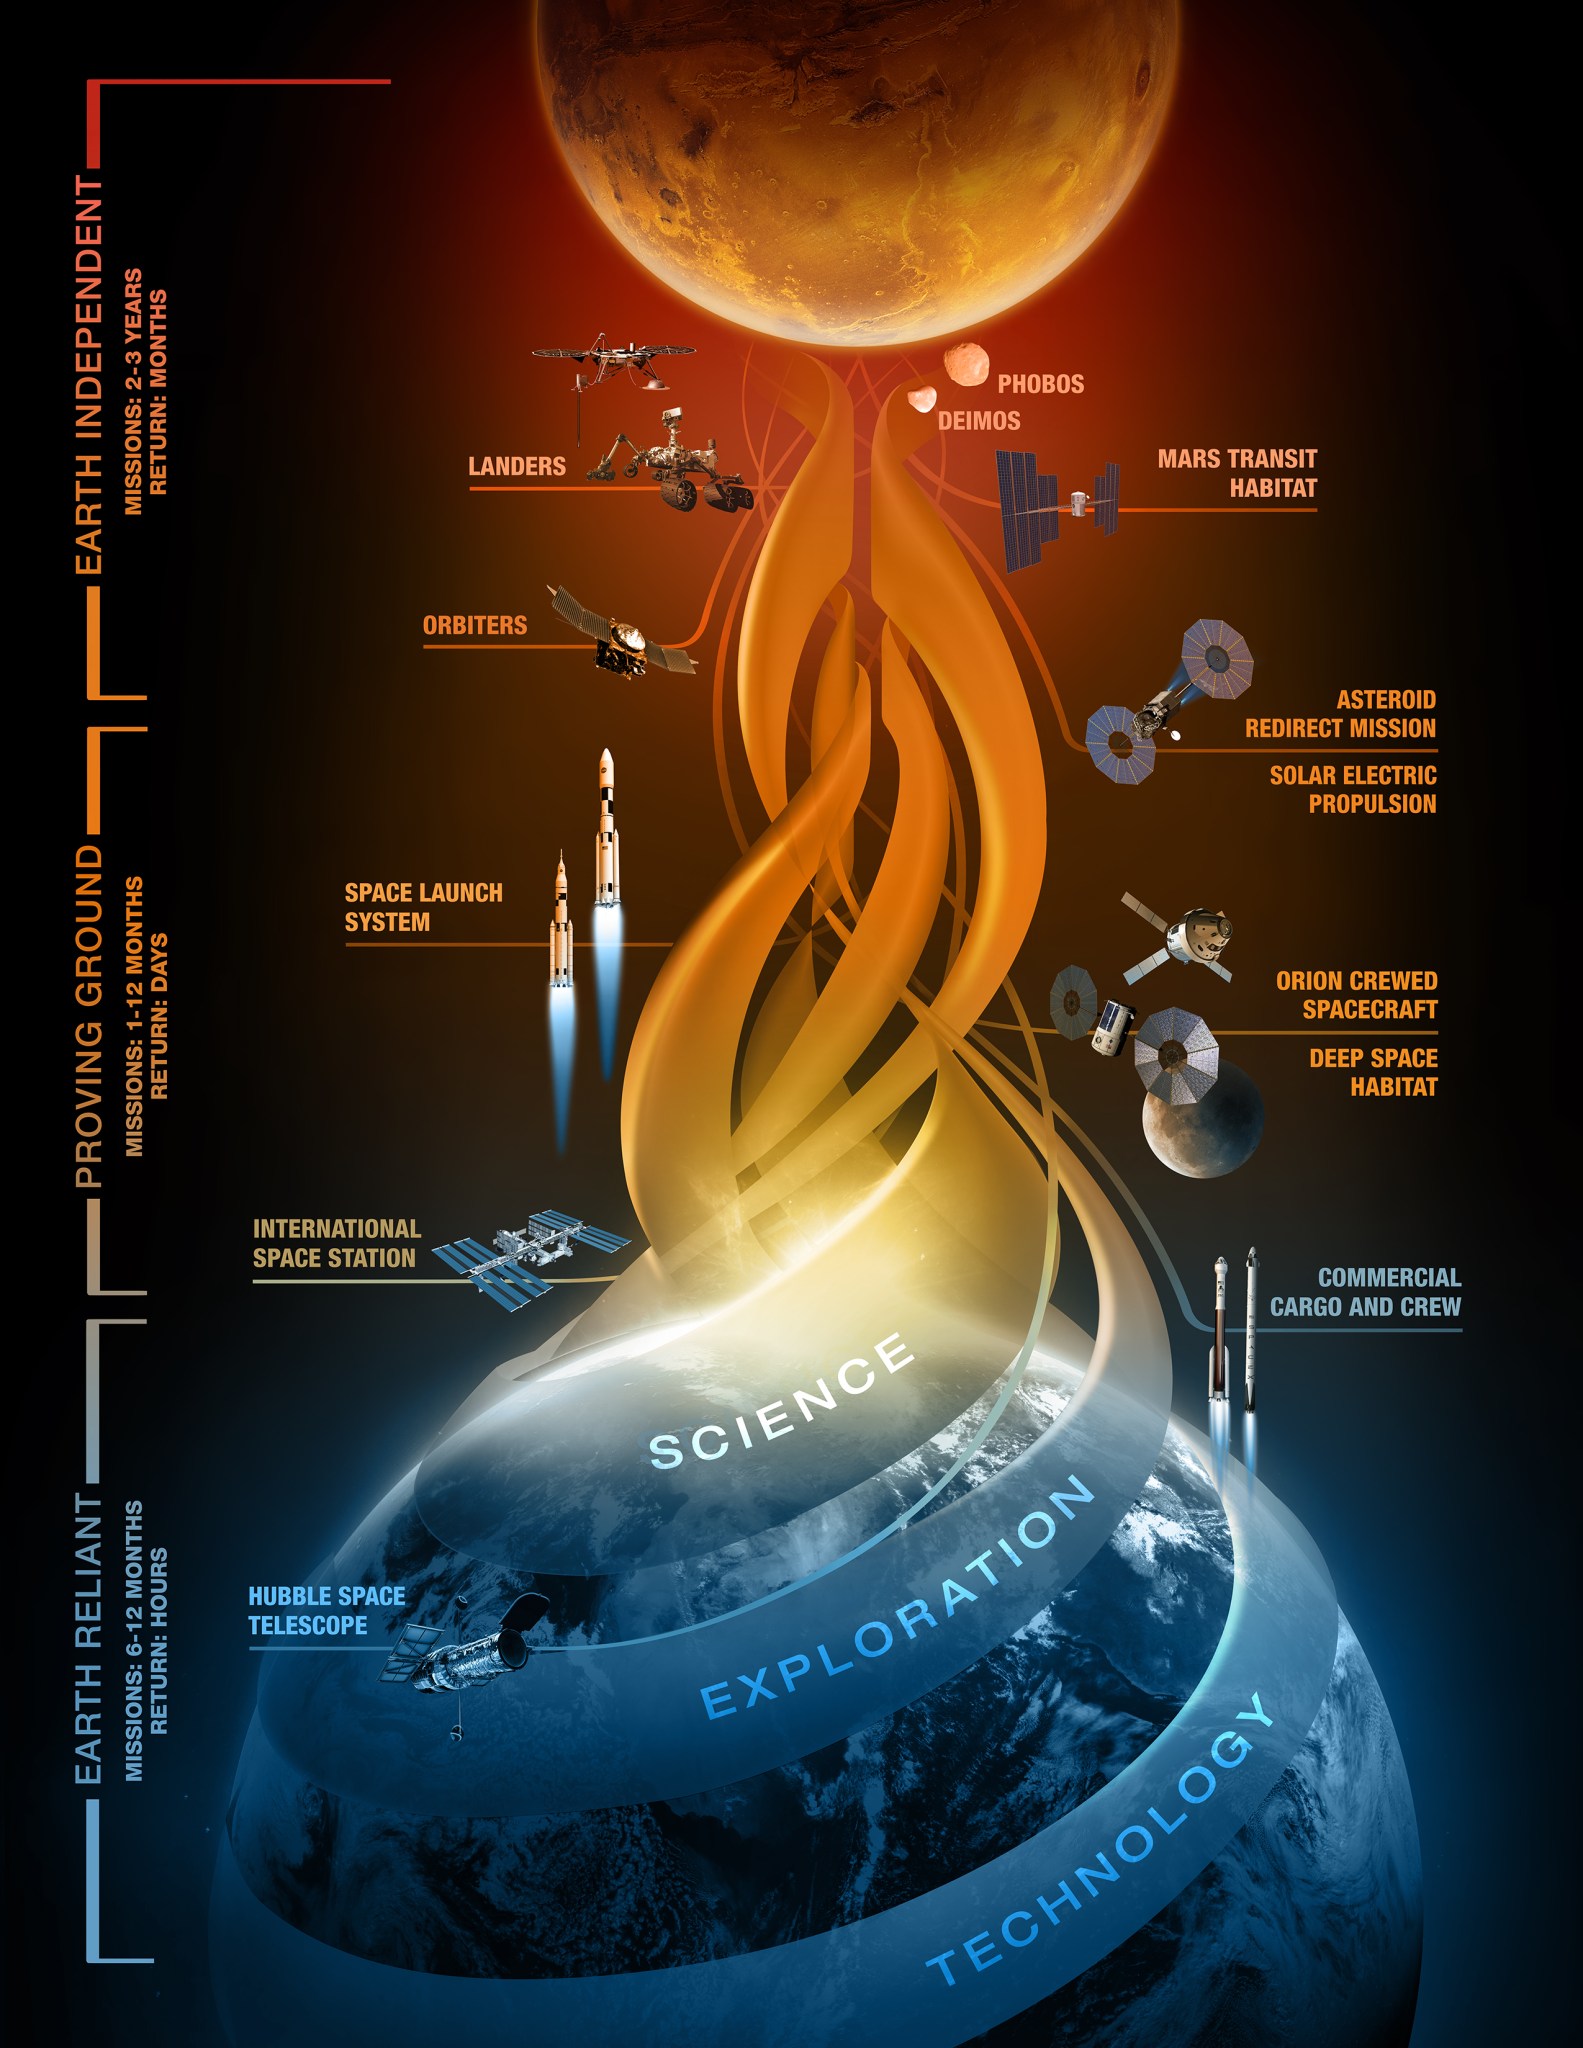 Journey to Mars art showing capability development leading to human missions to Mars